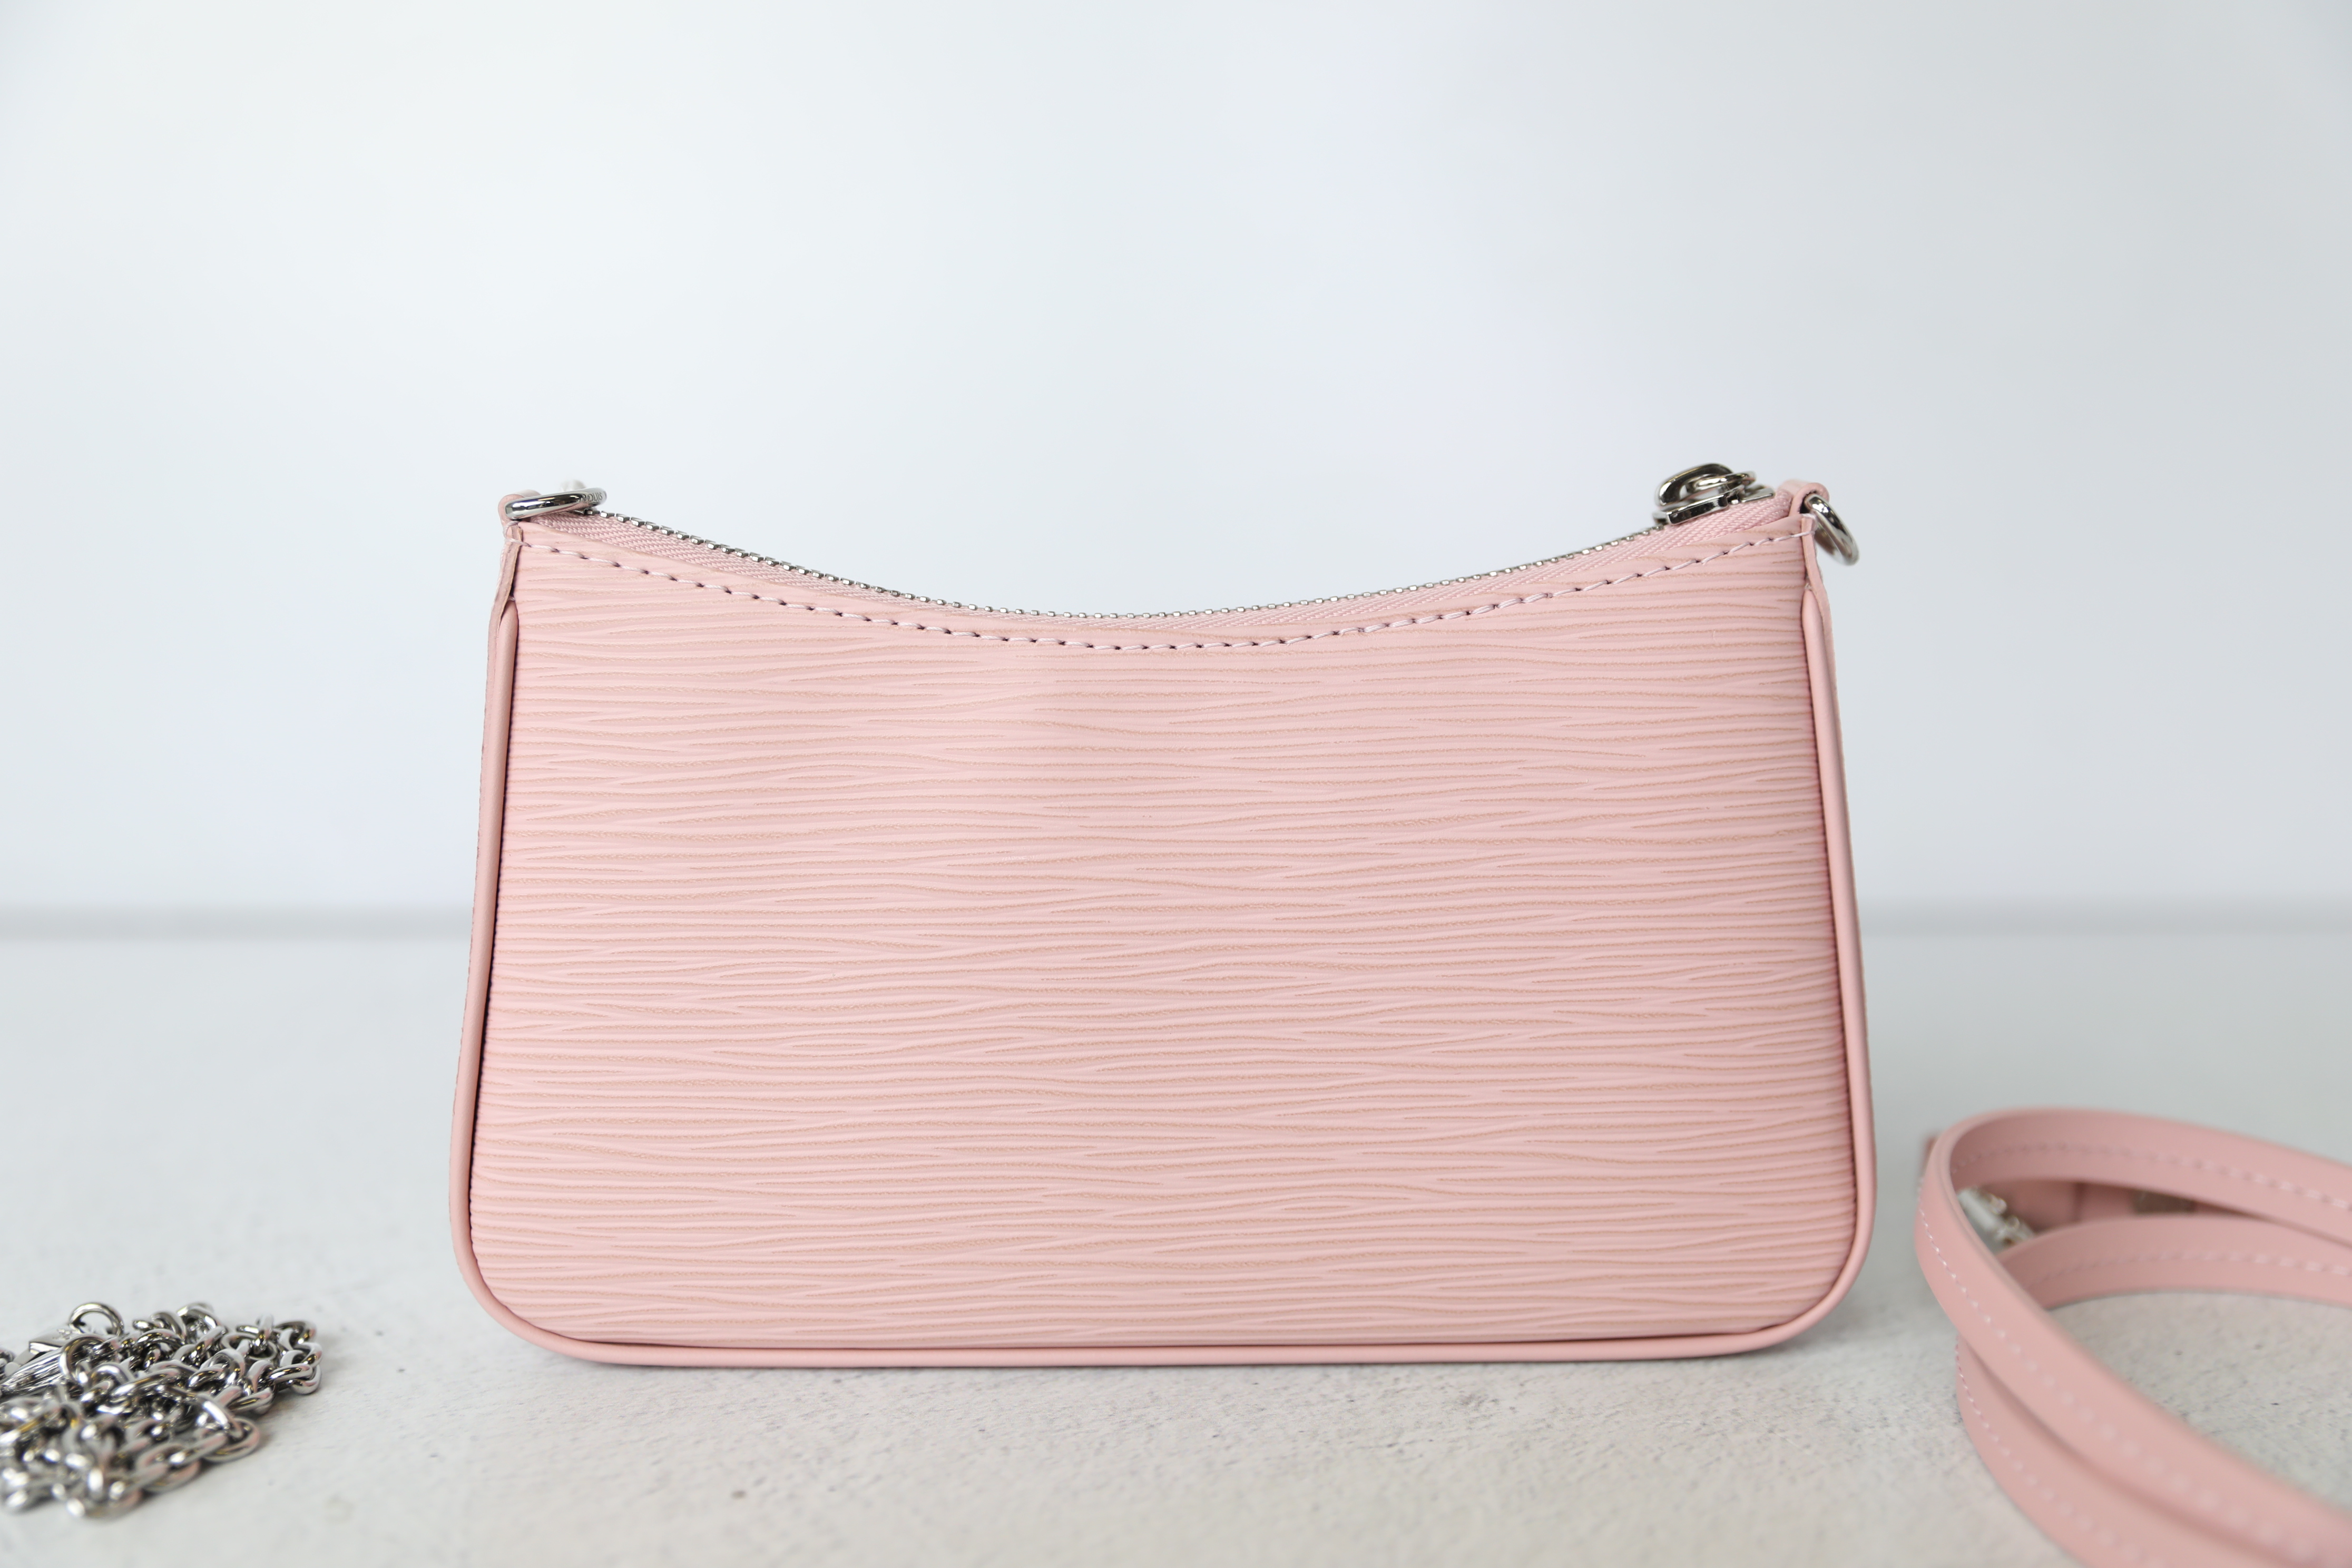 Louis Vuitton Pink Epi Leather Easy Pouch on Strap Bag - Yoogi's